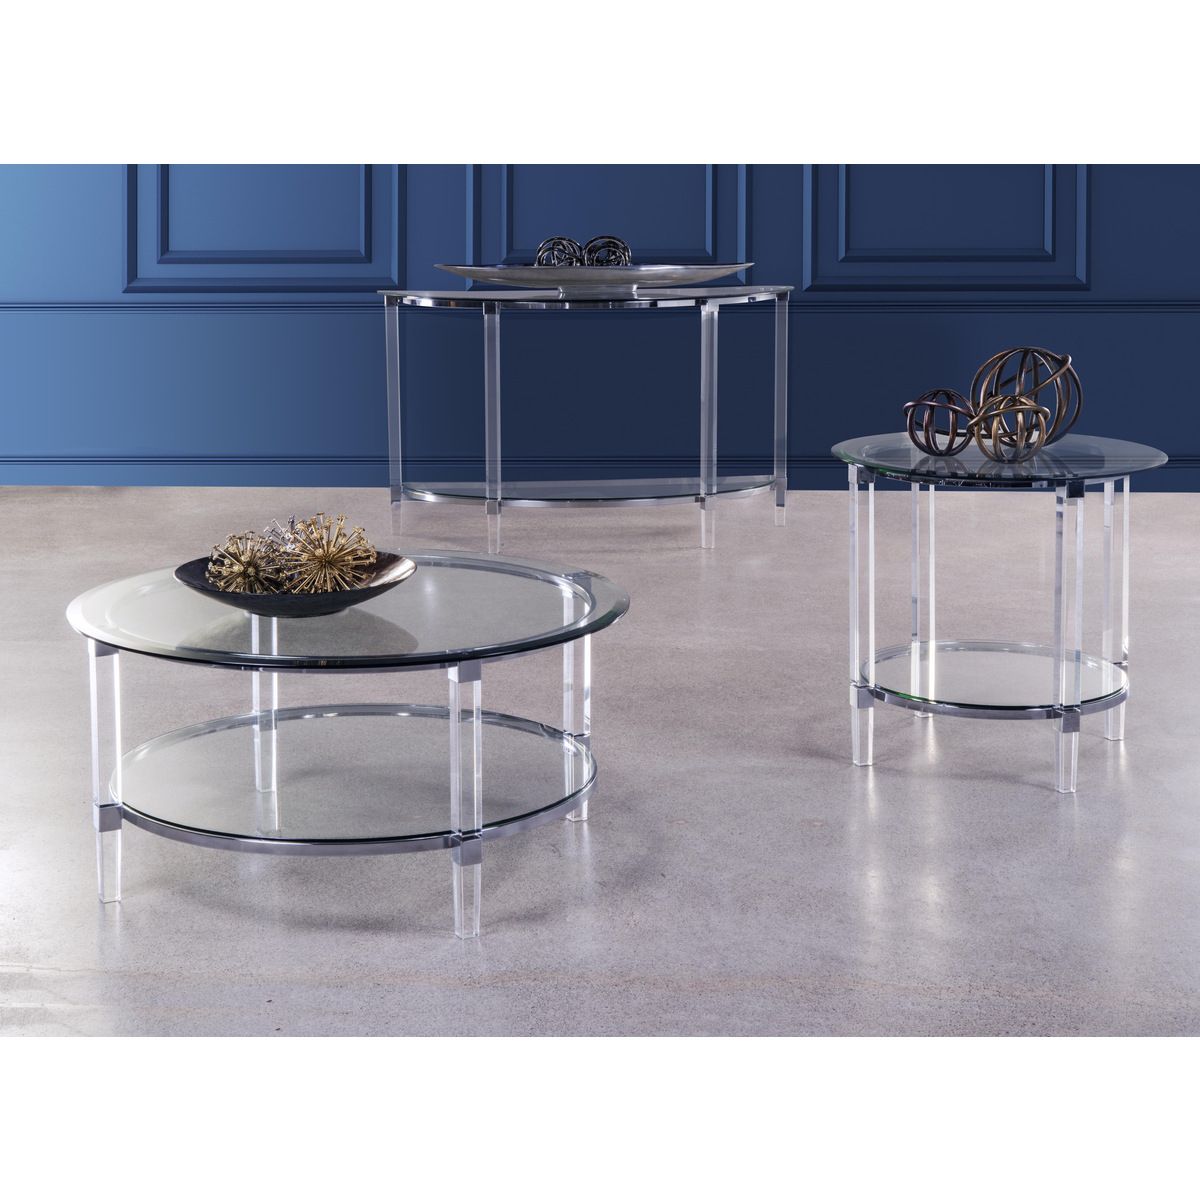 2020 Silver And Acrylic Coffee Tables Inside 3656 01 Round Coffee Table With Acrylic Legs (Gallery 2 of 20)